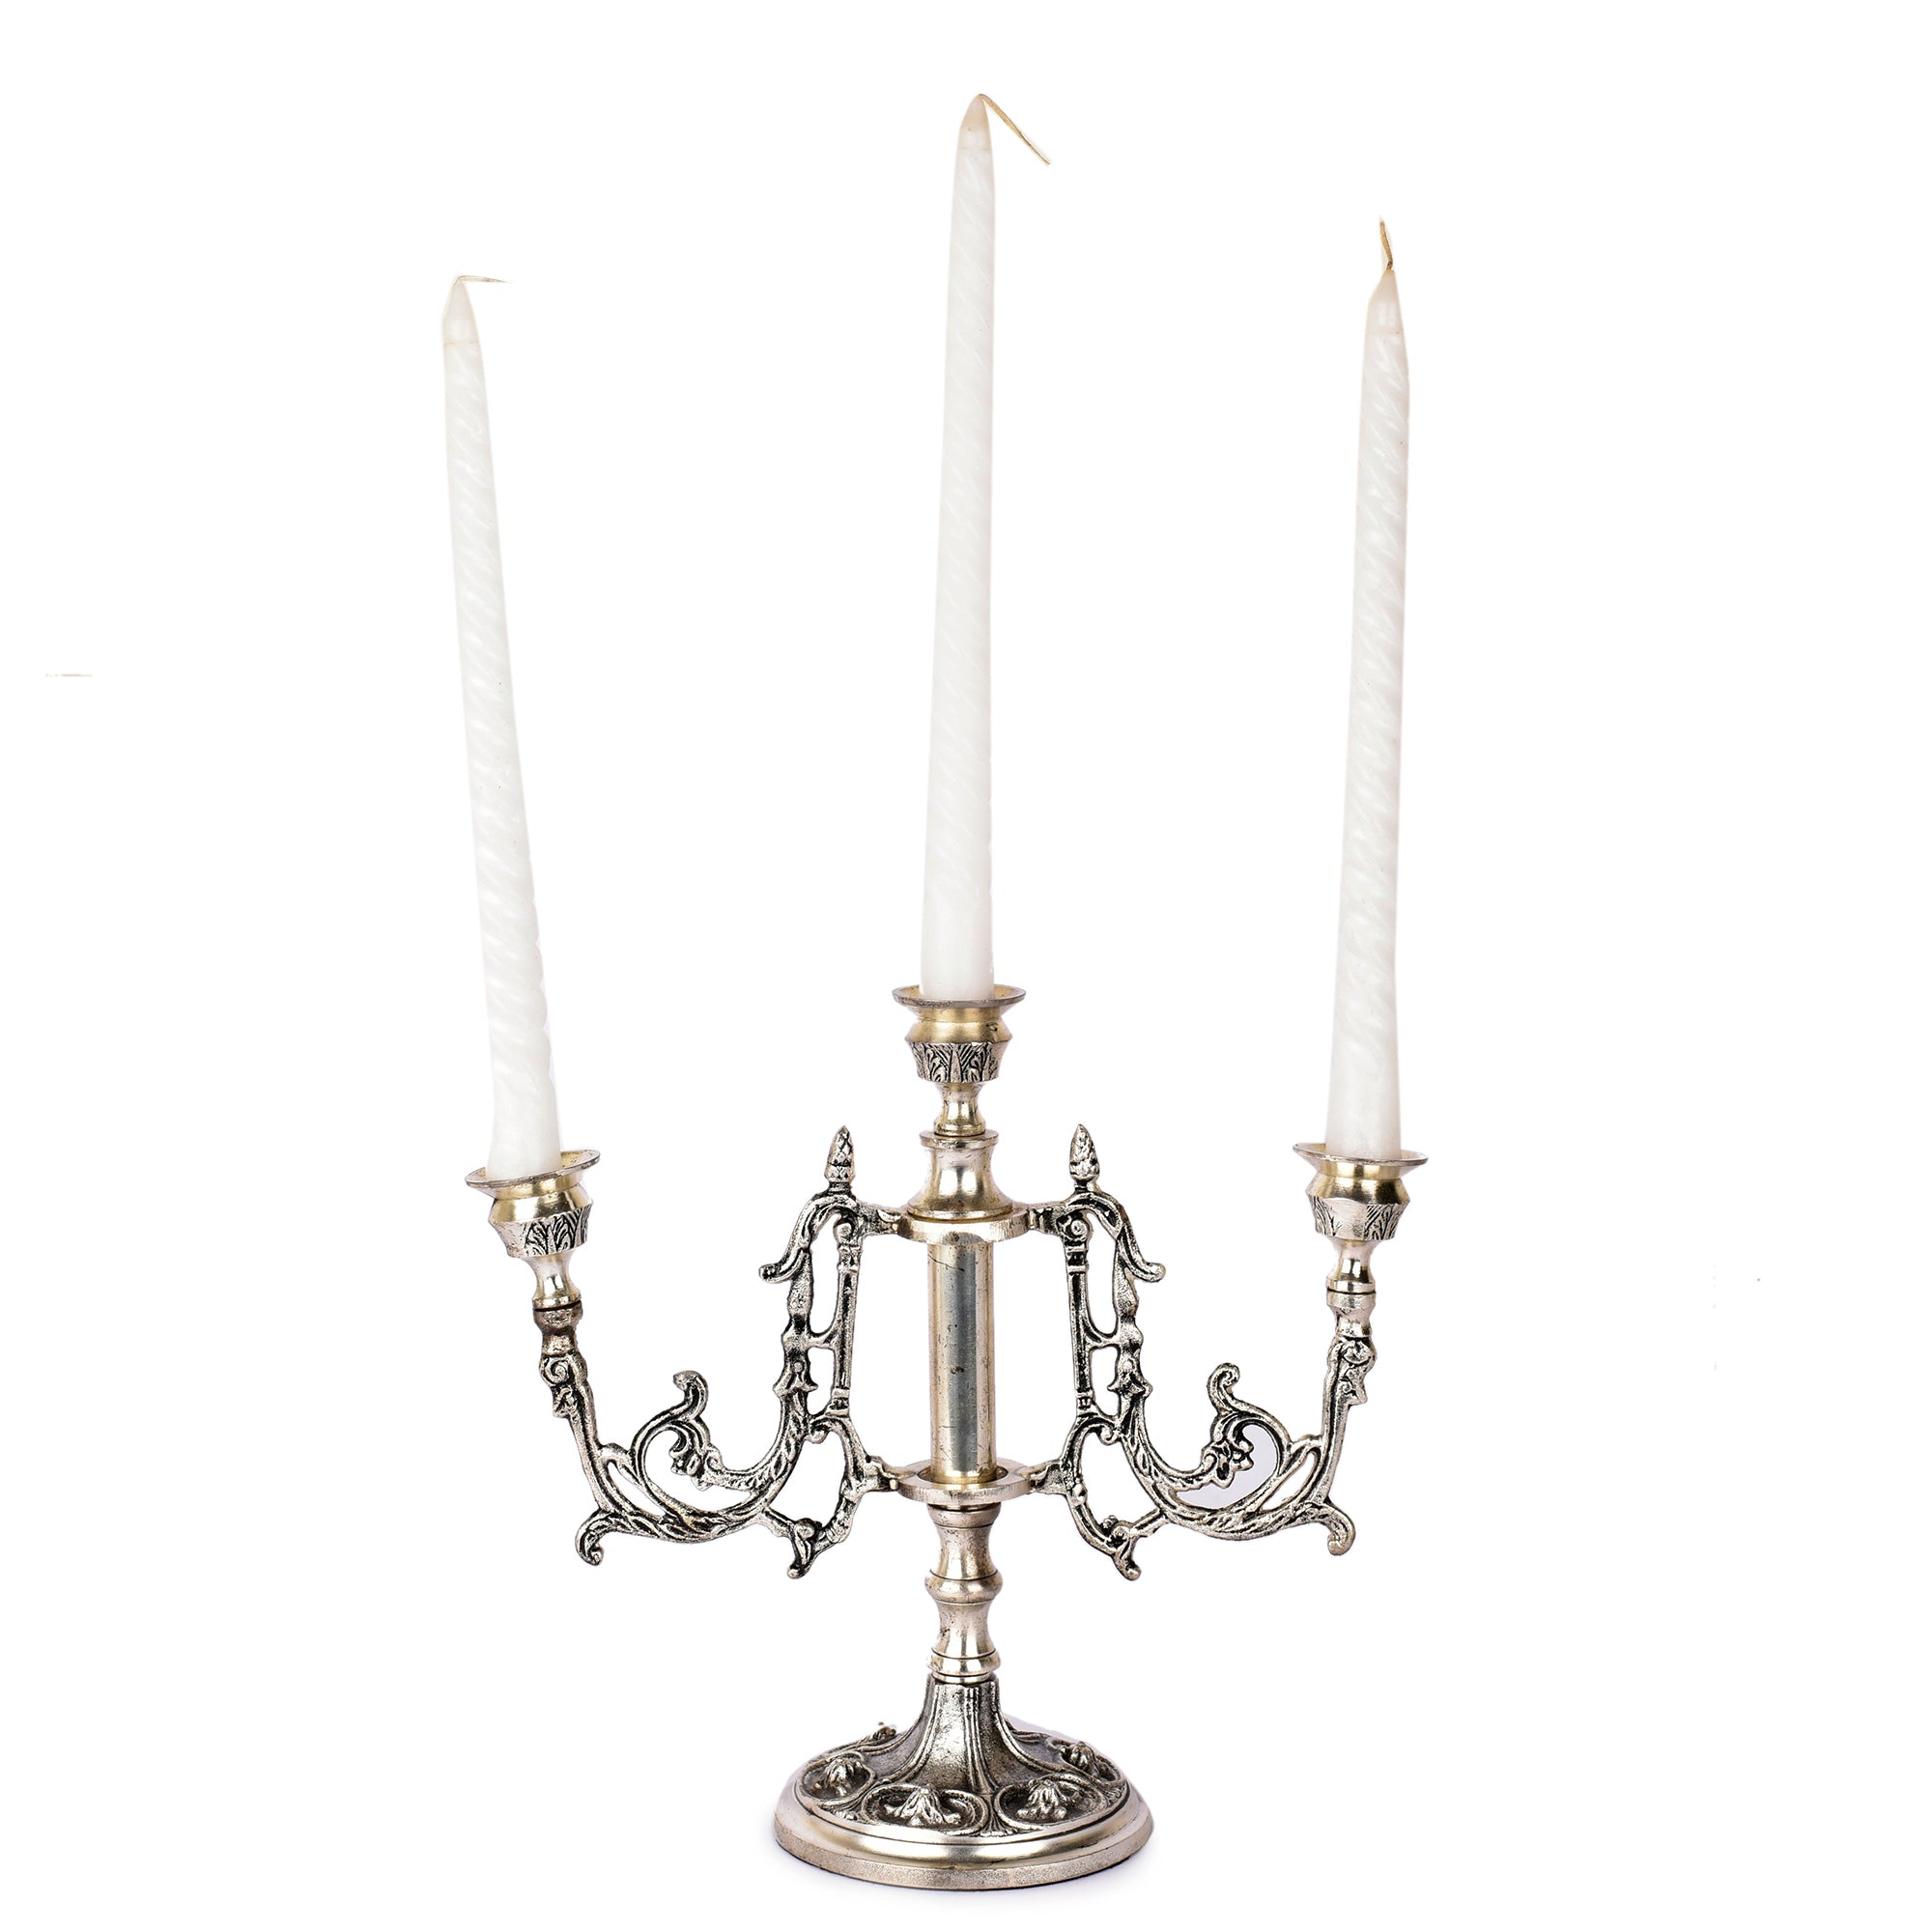 Vintage Victorian Style Silver Metal Miniature Candle Holder Holds 3 Candles